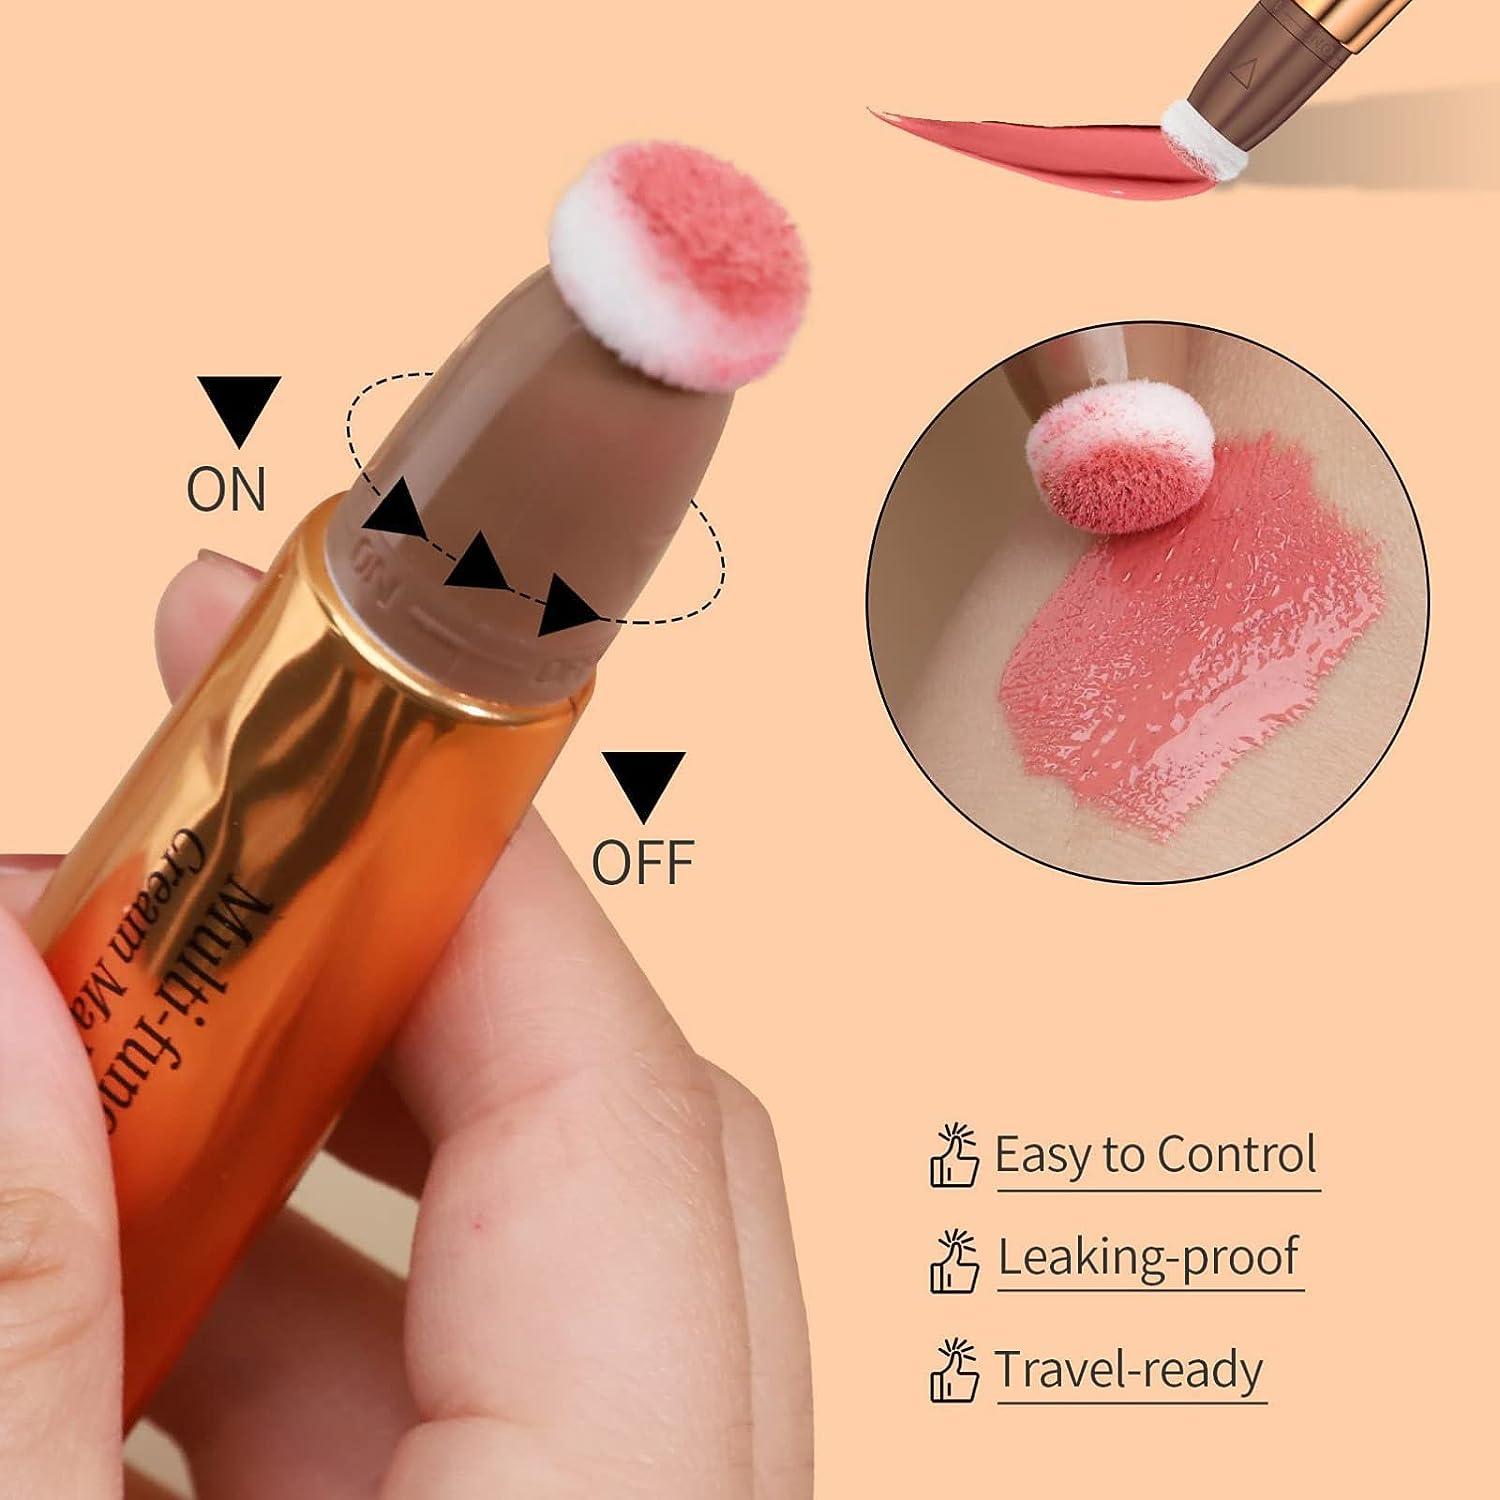 HSMQHJWE Cool Things under 5 Dollars Face Makeup Concealer Foundation  Creamy Moisturizing Peach Foundation 